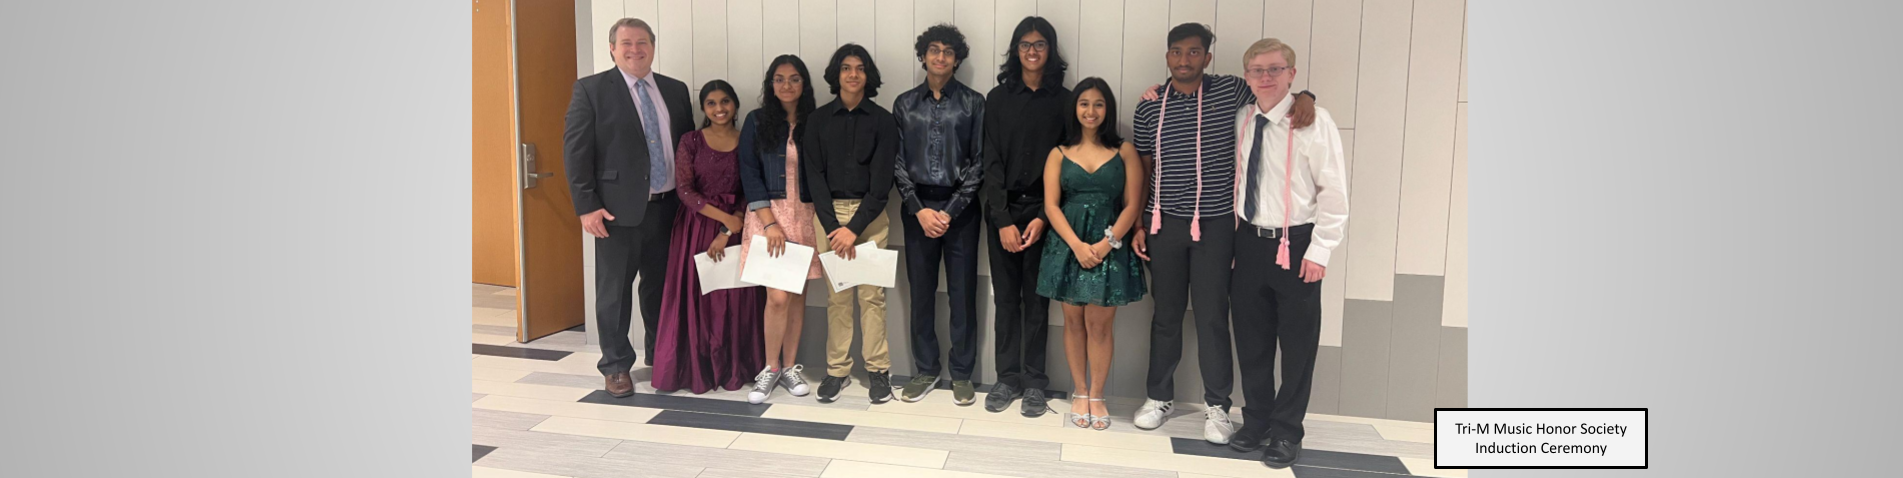 Tri-M Music Honor Society Inductees